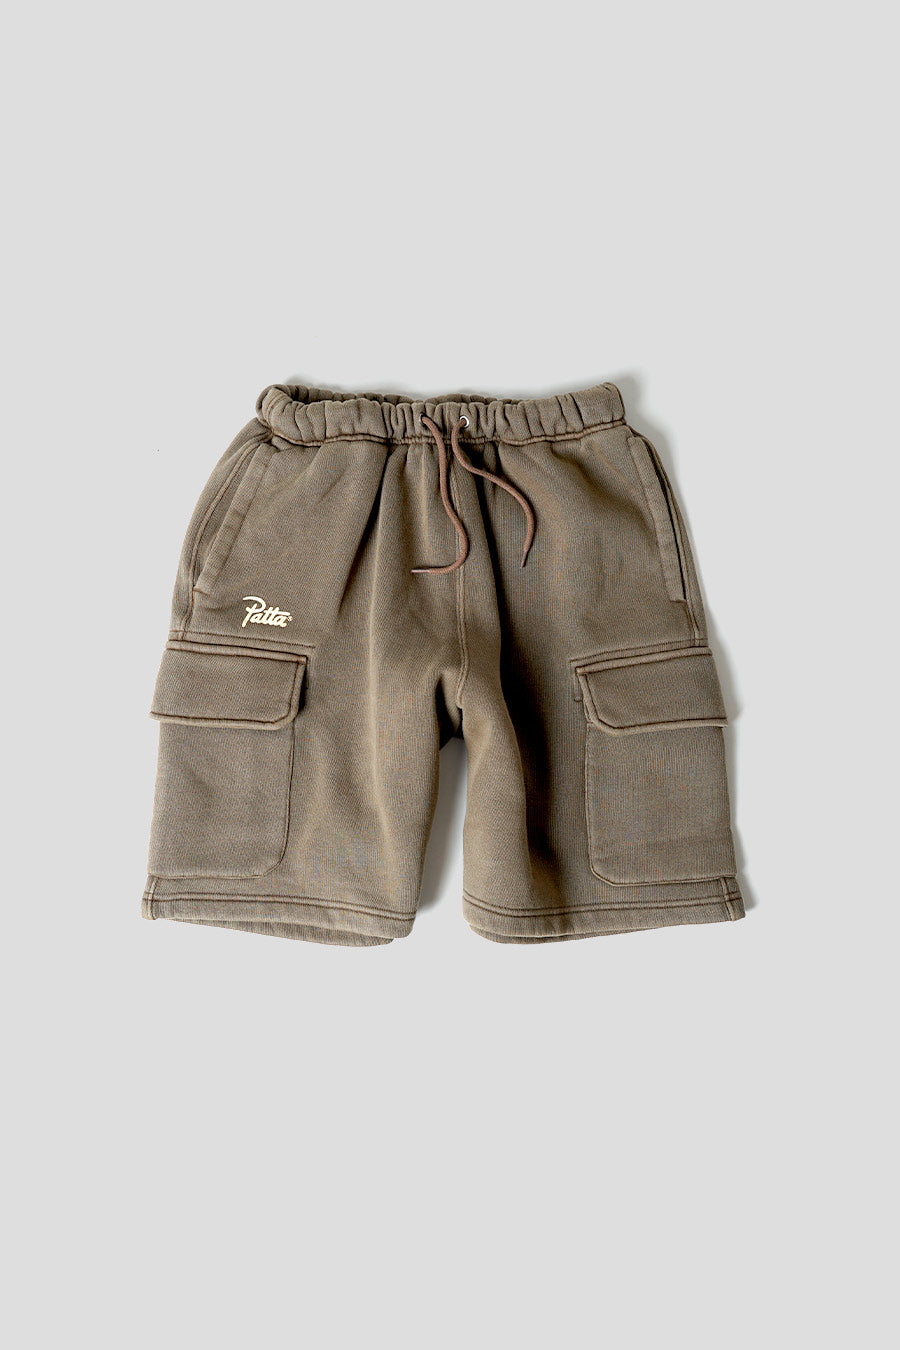 Patta - SHORT CLASSIC WASHED CARGO TAUPE - LE LABO STORE